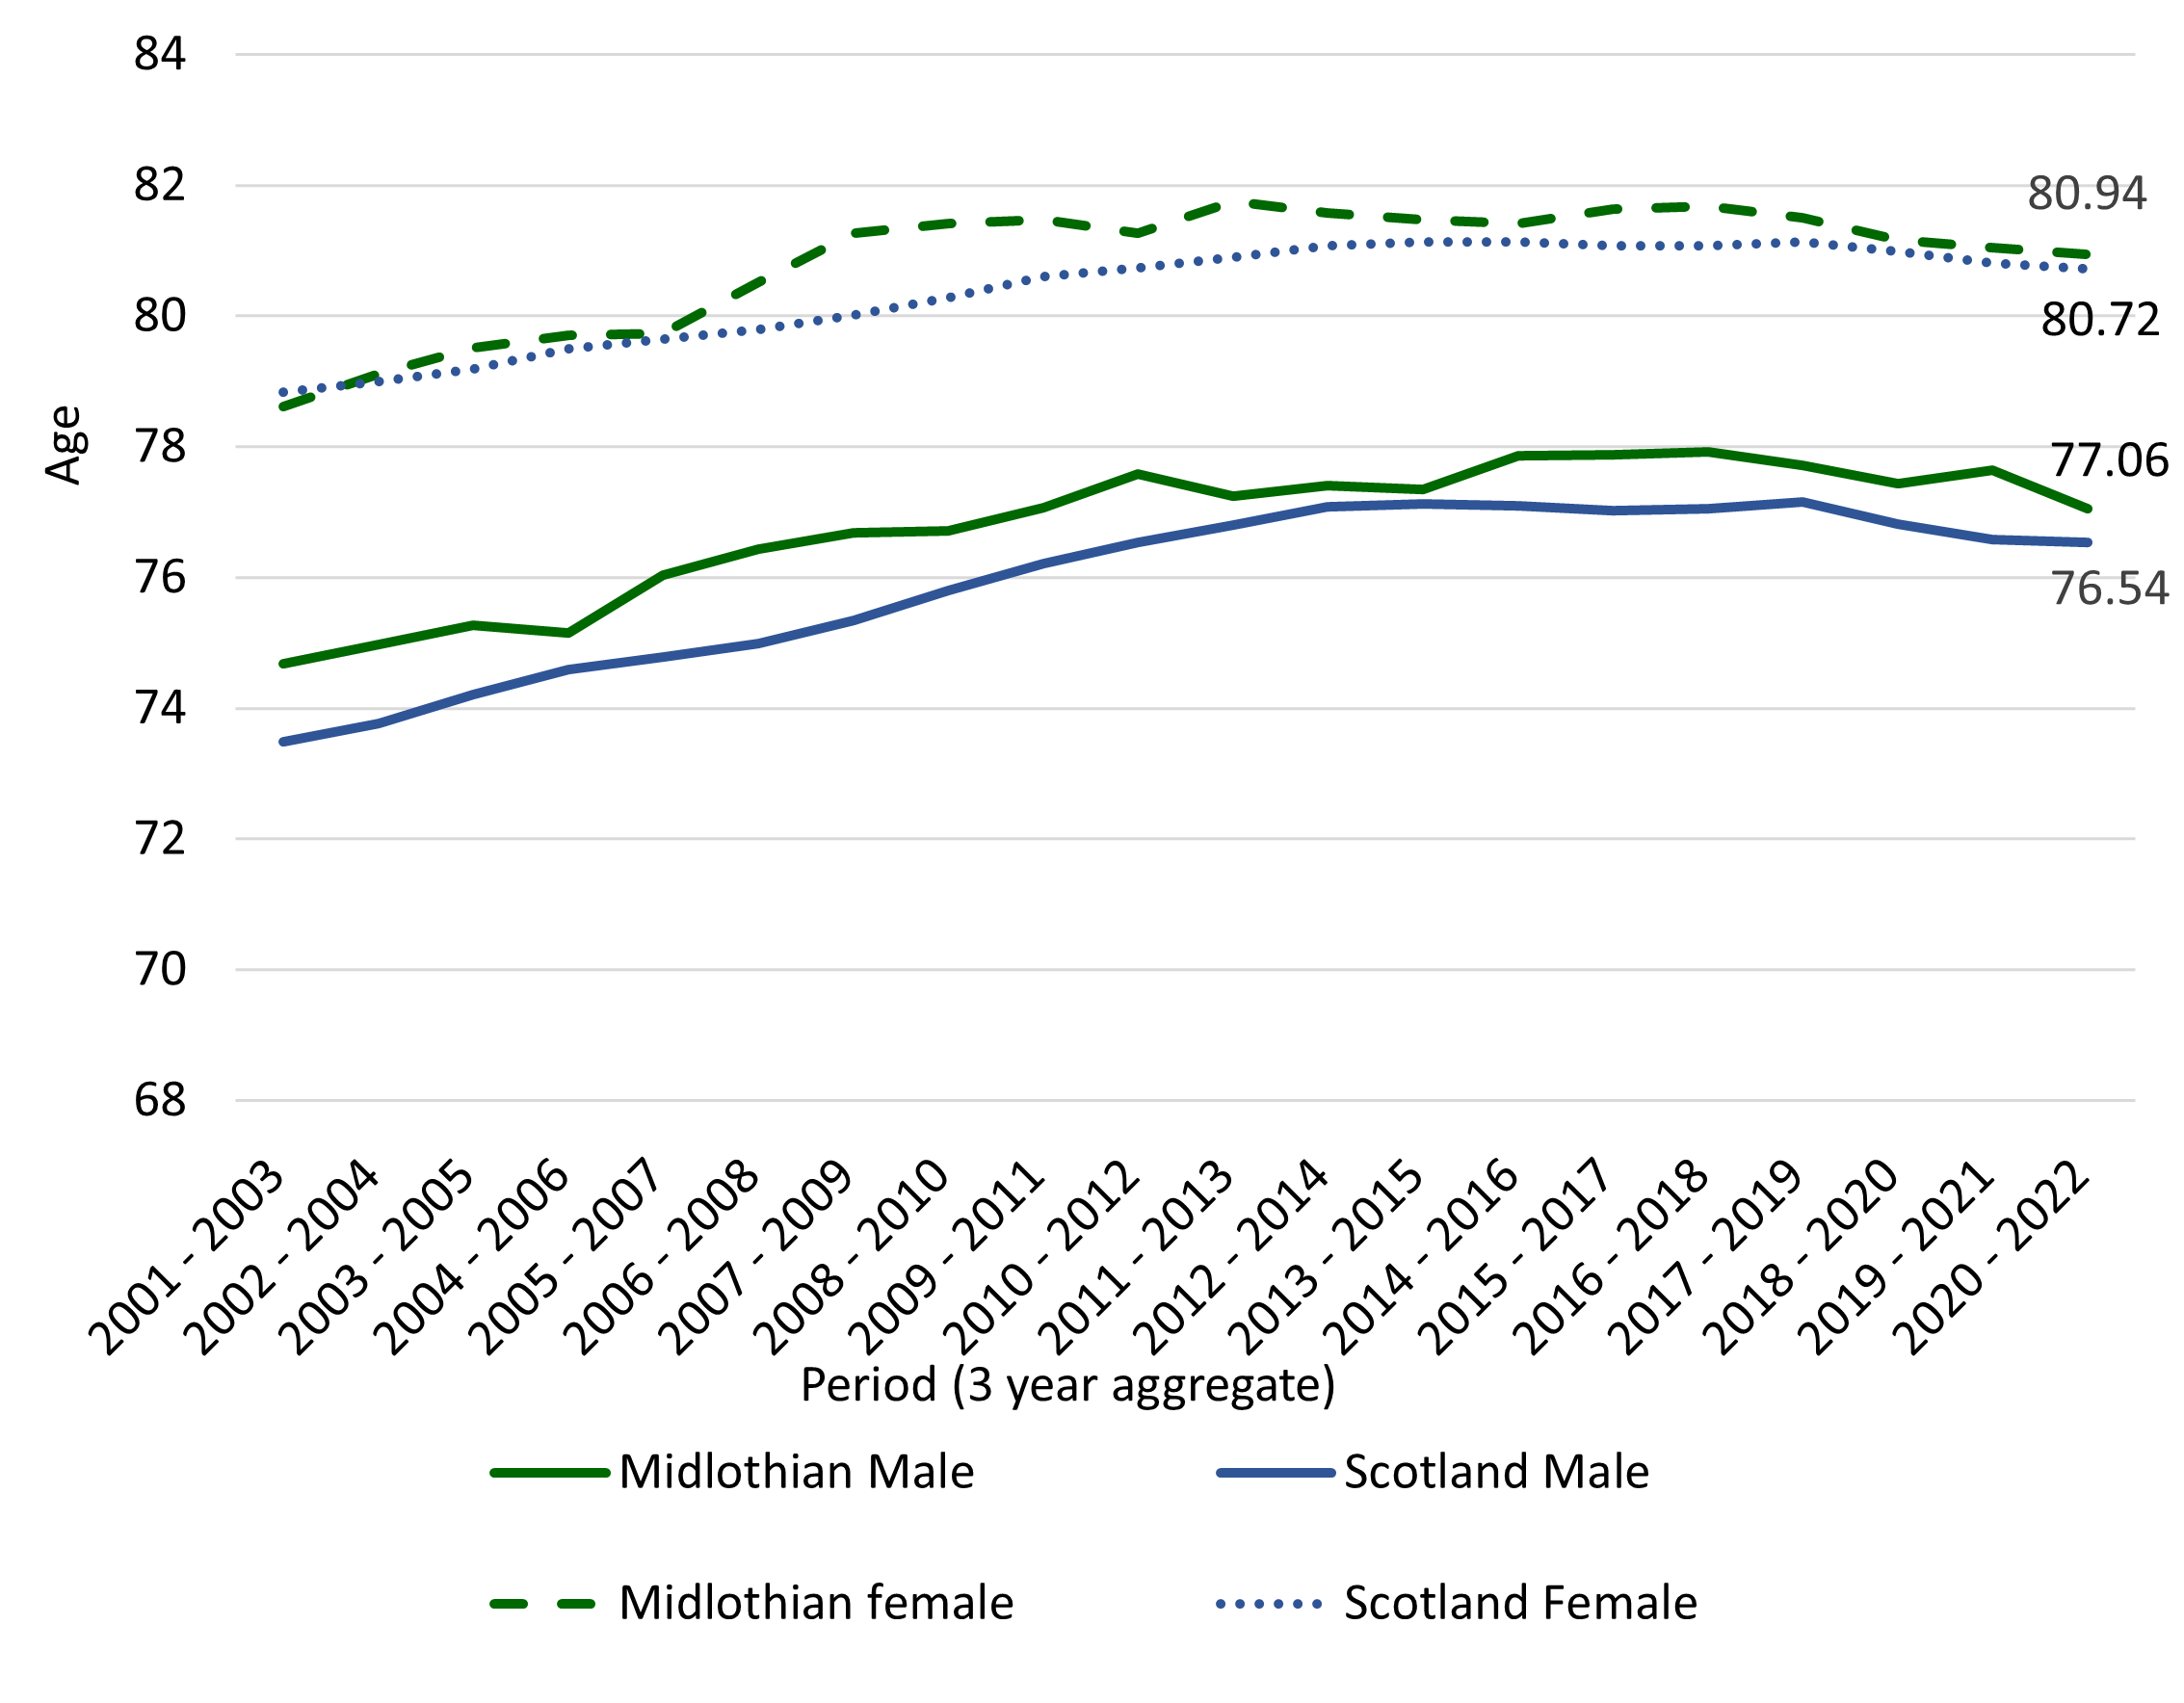 Line graph showing Life expectancy increased steadily  in both Midlothian and Scotland from 2001-2003 until 2011-13, when growth began to stall.  Since then, life expectancy in males and females has fallen, with Midlothian slightly above that of Scotland.  Life expectancy in Midlothian was considerably higher for females than for males over the period, with males and females born in Midlothian in 2020-2022 having a life expectancy of 77.06 and 80.94 years respectively